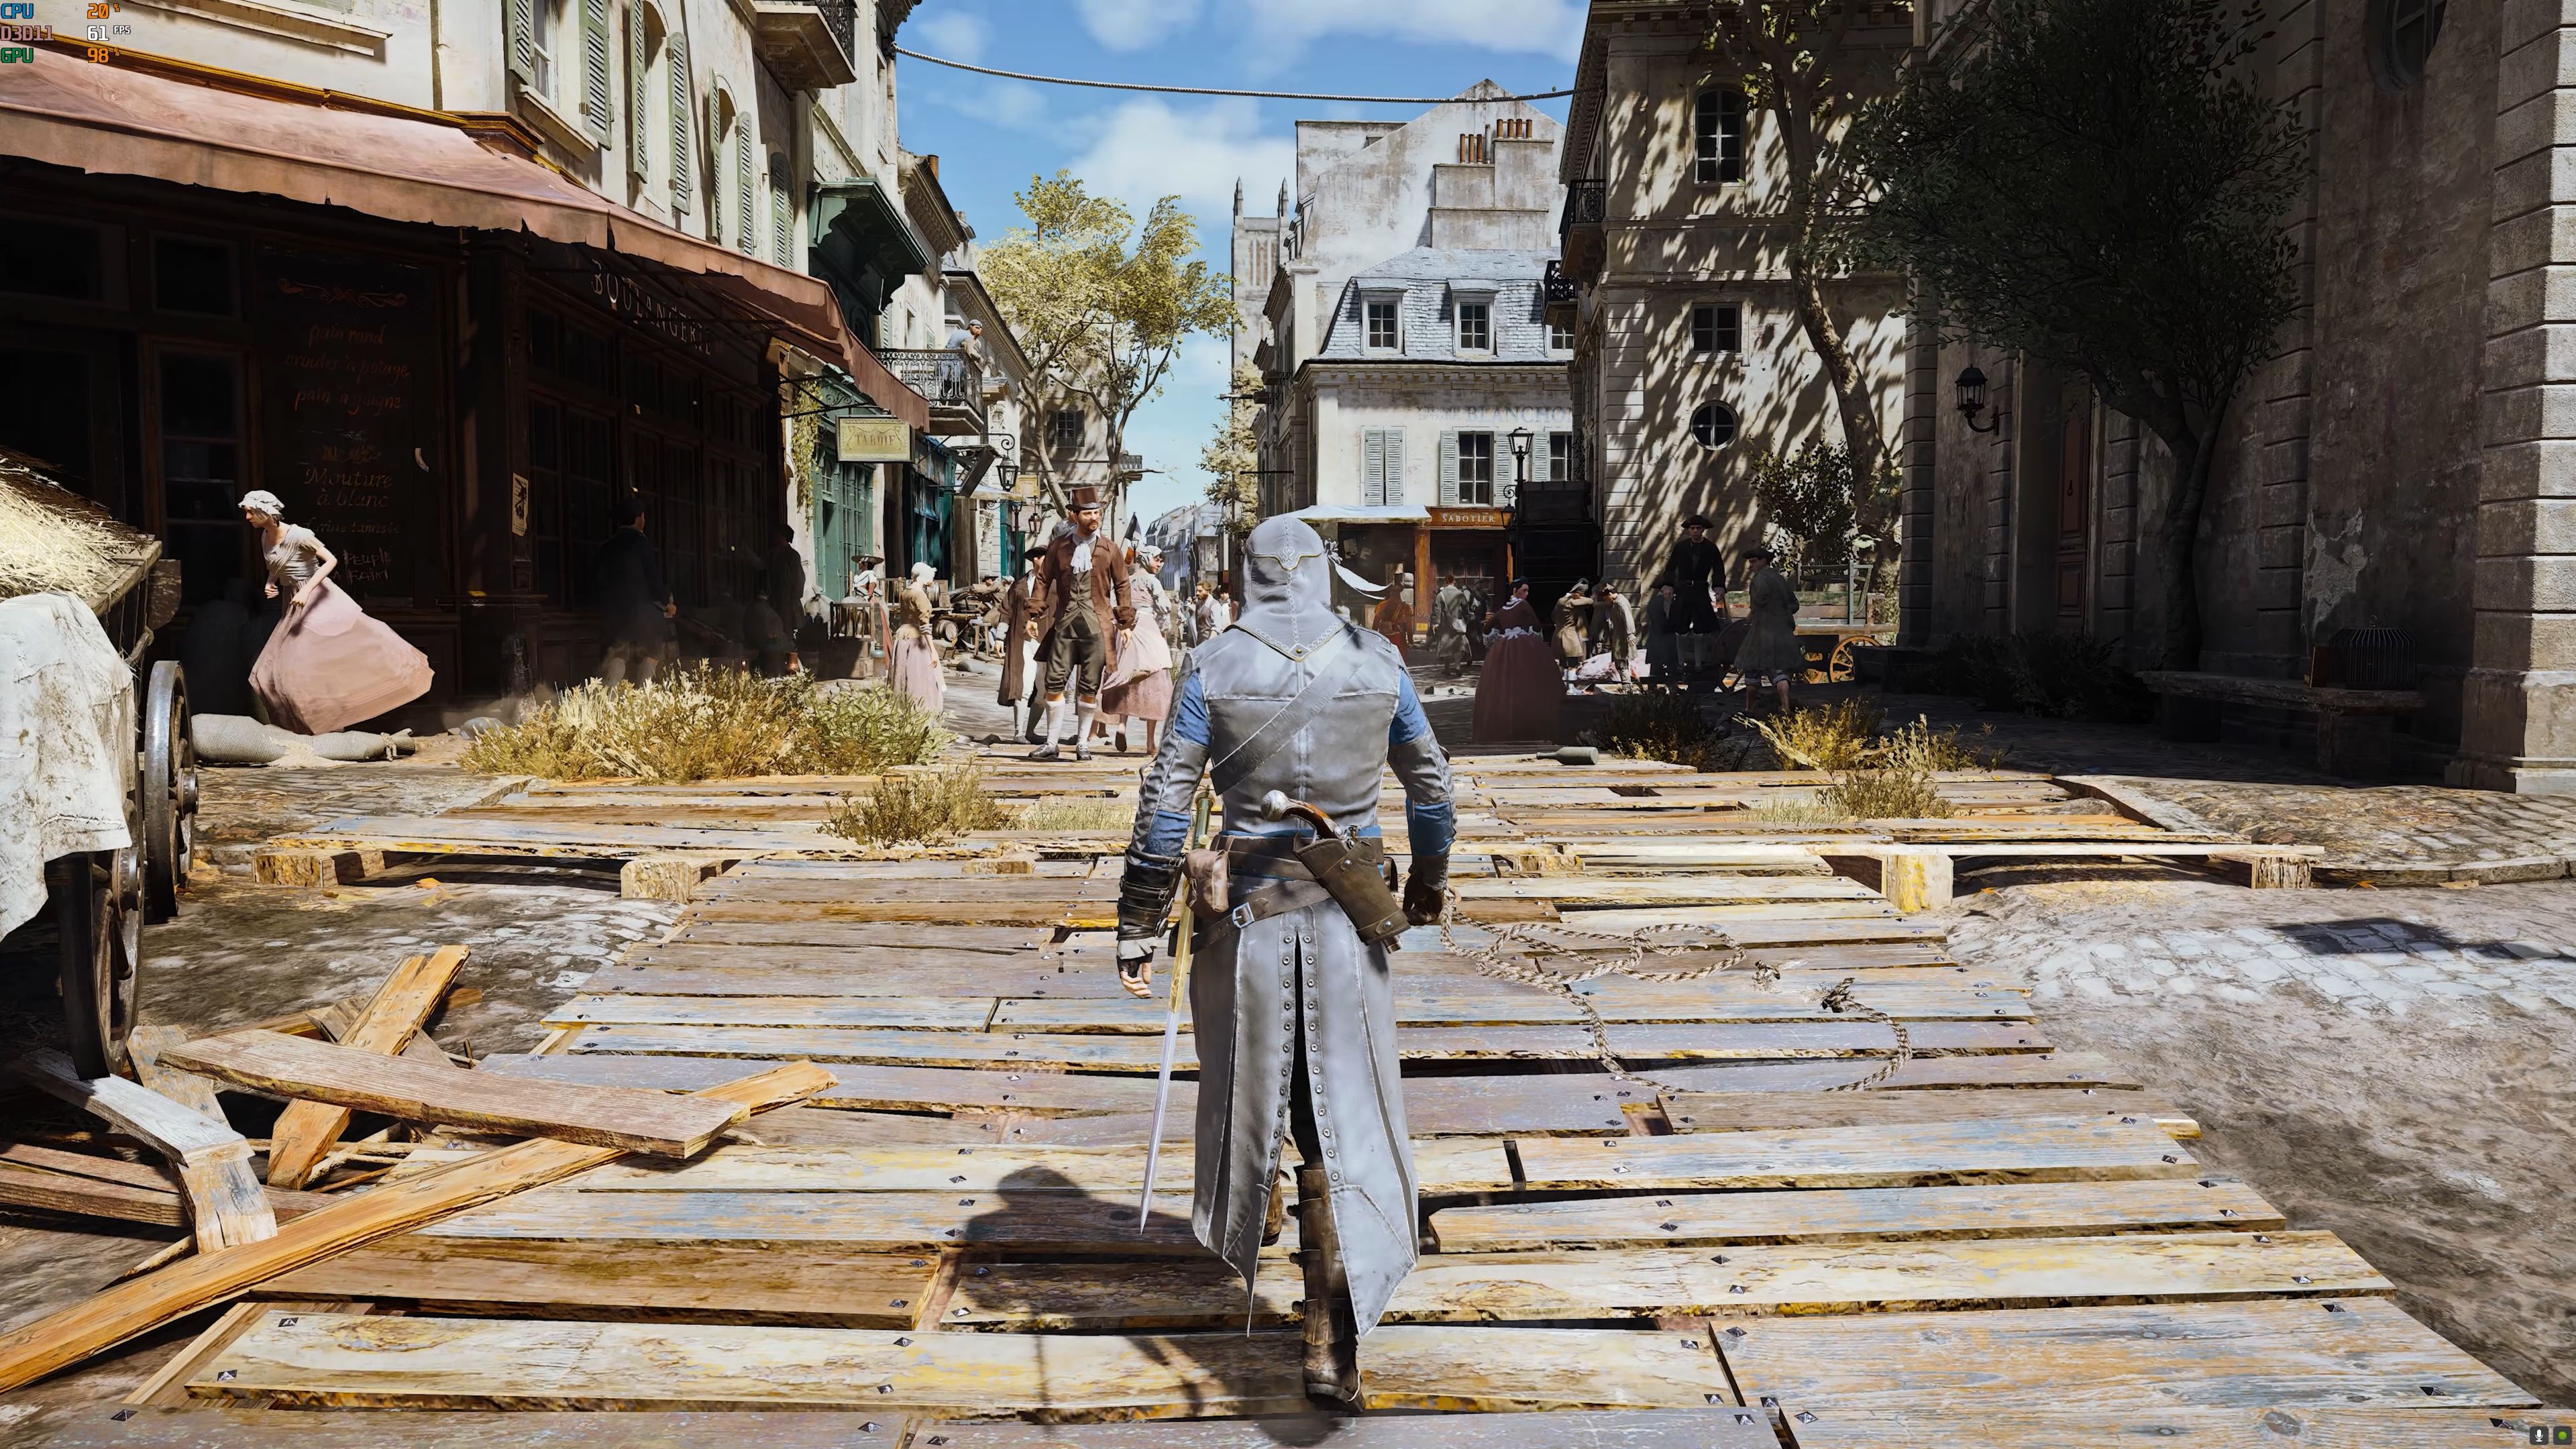 Assassin's Creed Unity Ray Tracing Ultra Realistic Reshade V2 Modding Guide  